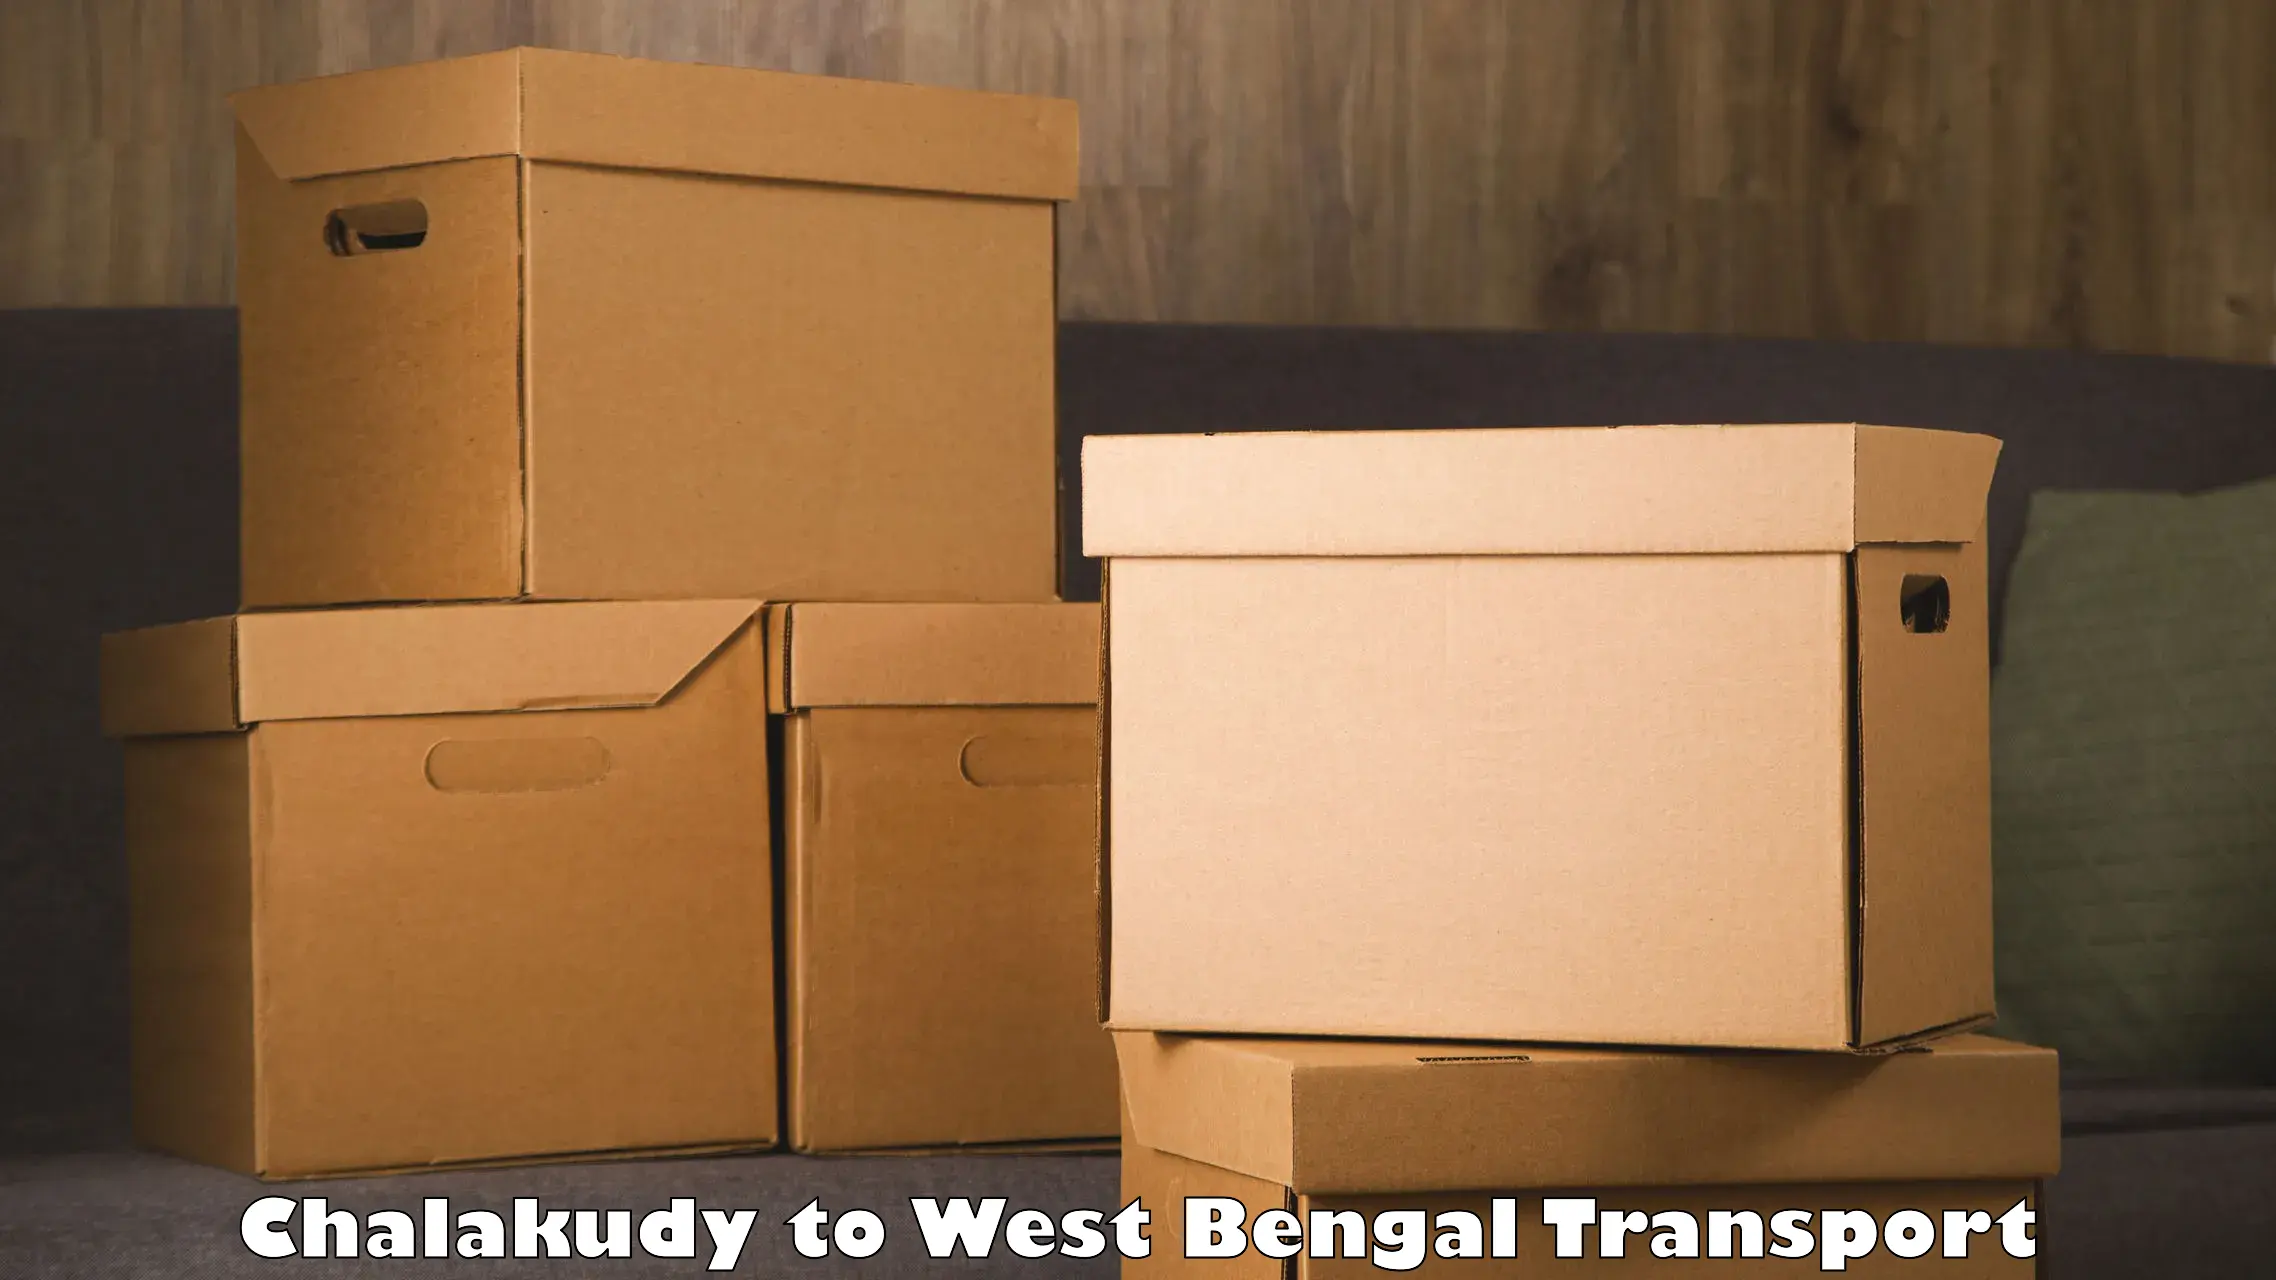 Truck transport companies in India Chalakudy to Basirhat